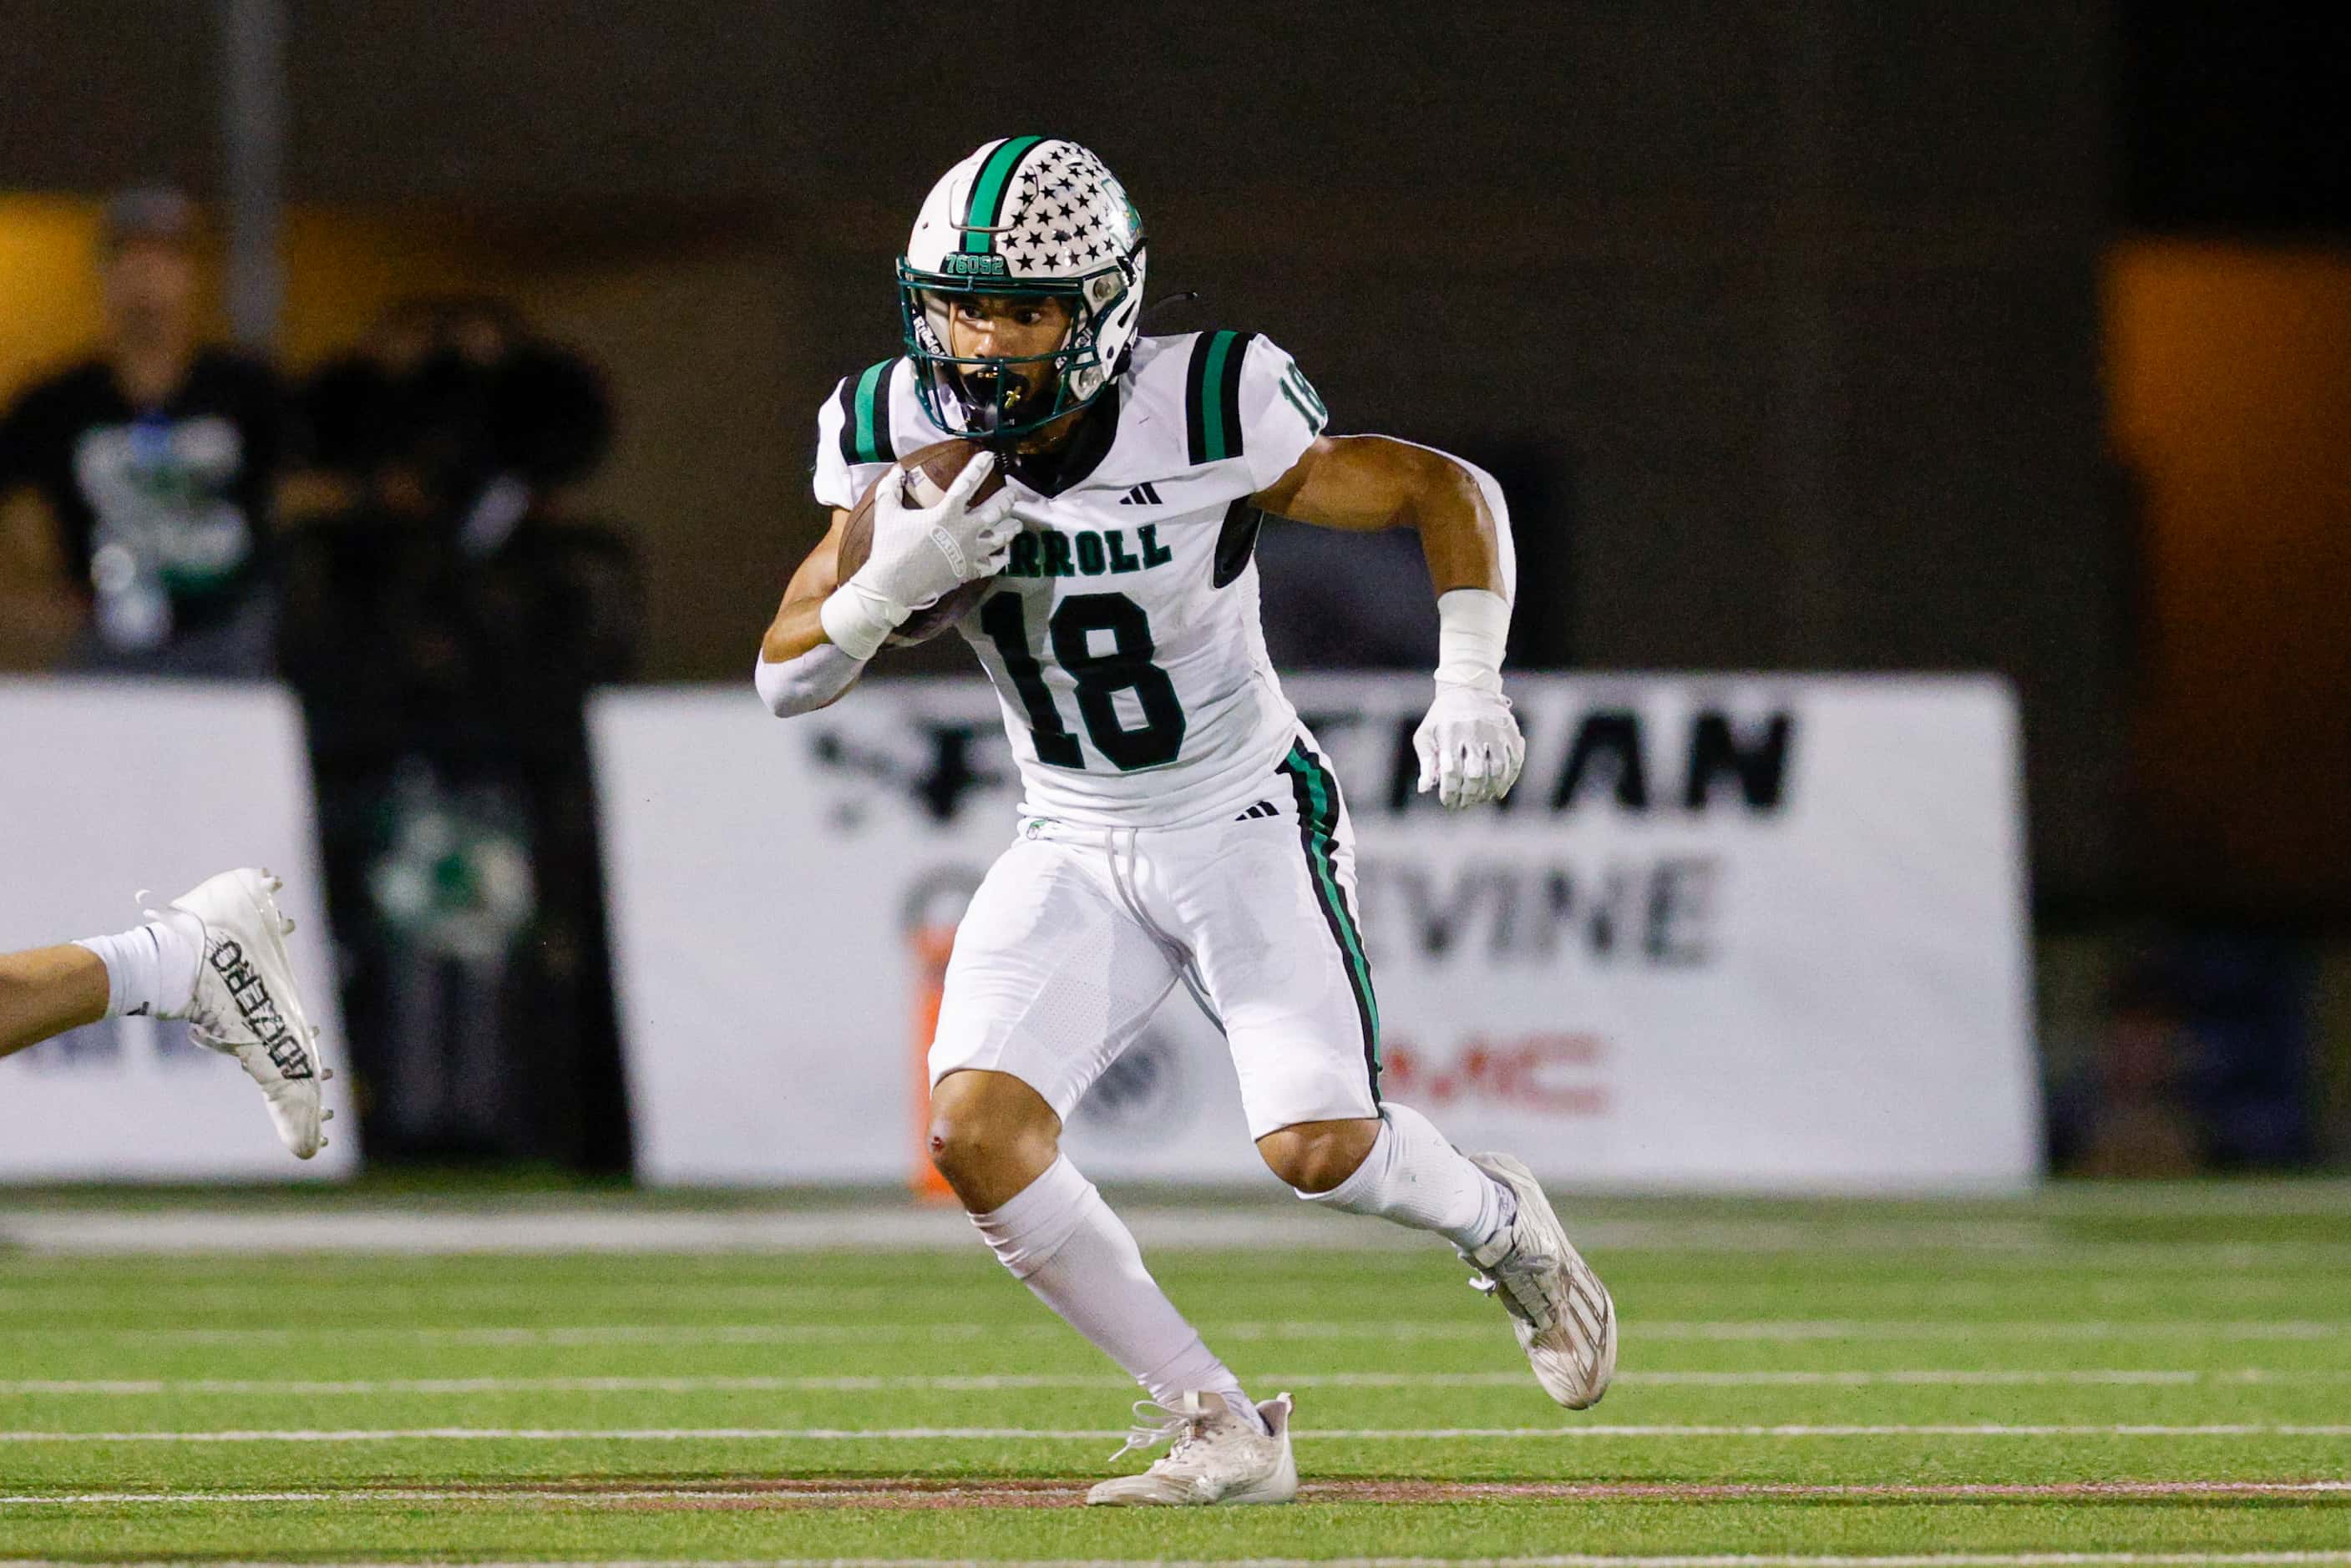 Southlake Carroll’s Zach Hays runs after a catch during the second half of a District 4-6A...